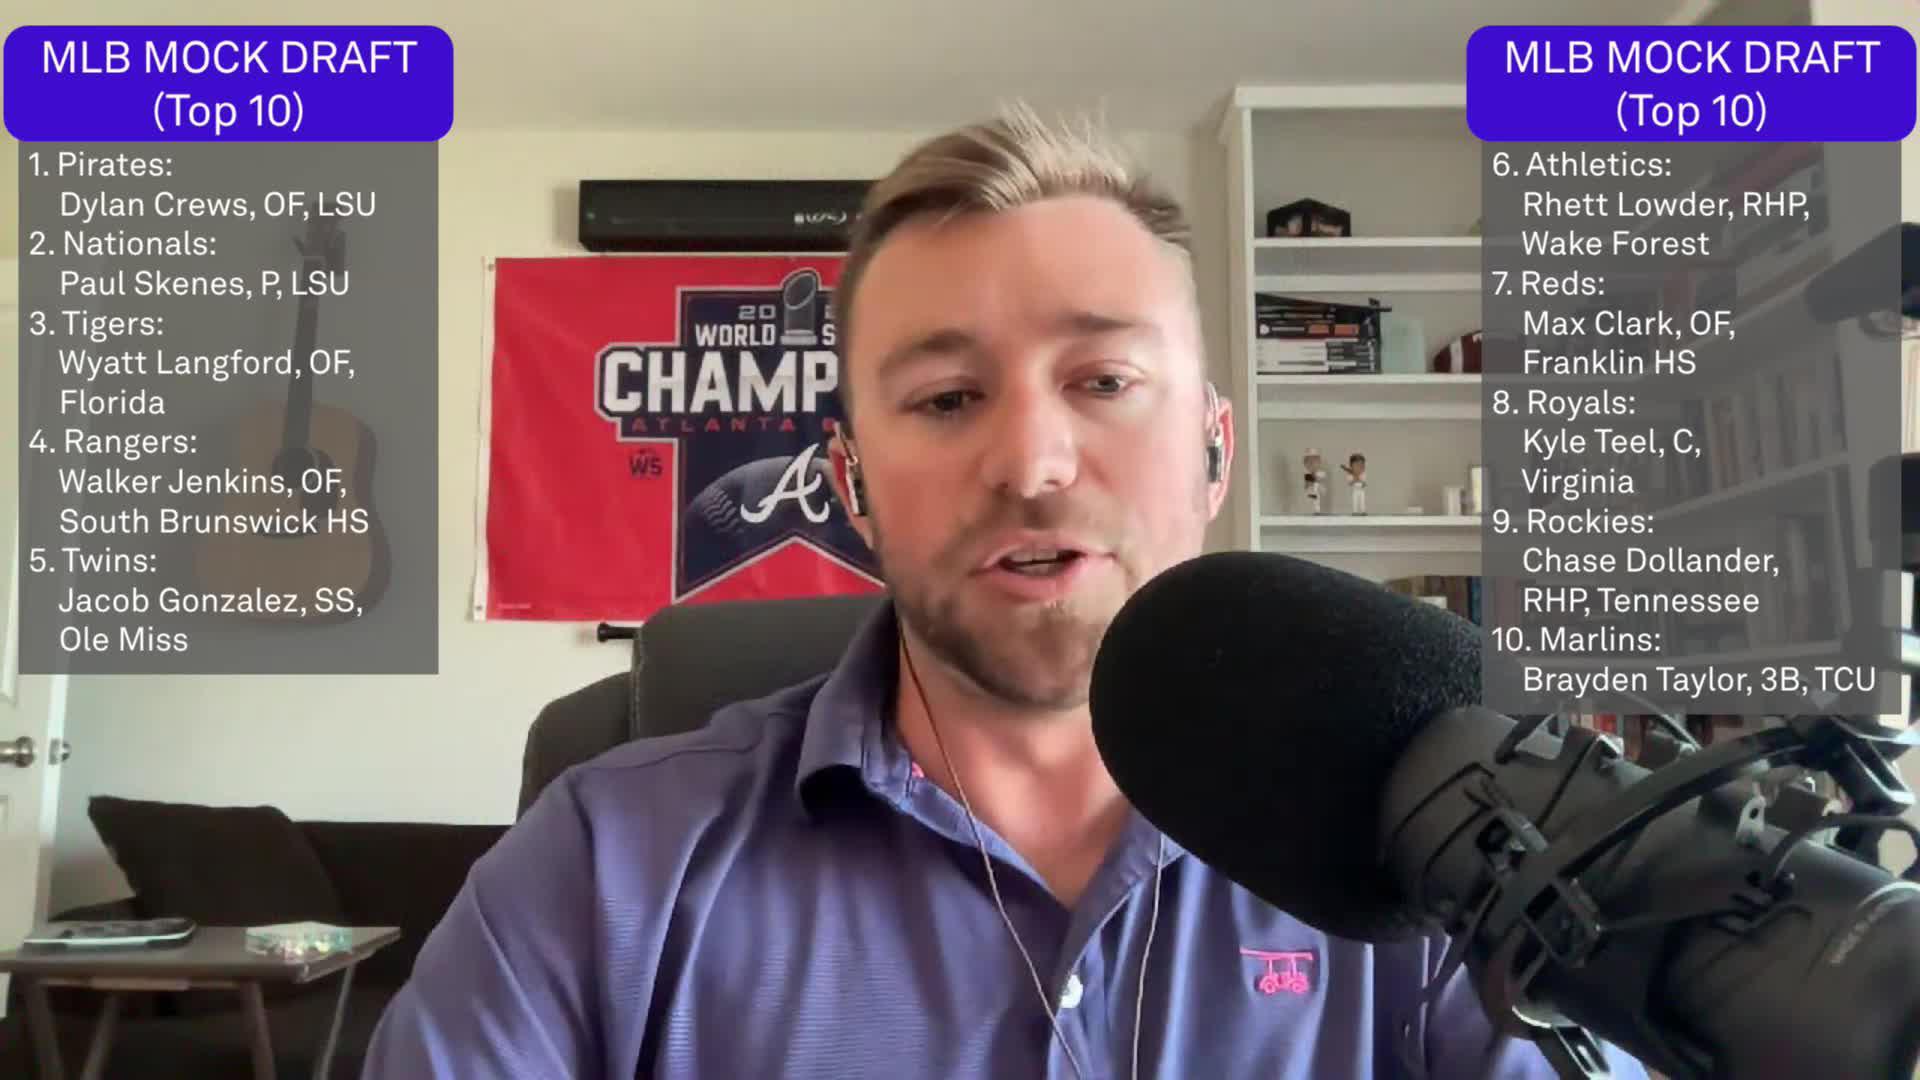 MLB Mock Draft VOD Highlights and Live Video from Bleacher Report